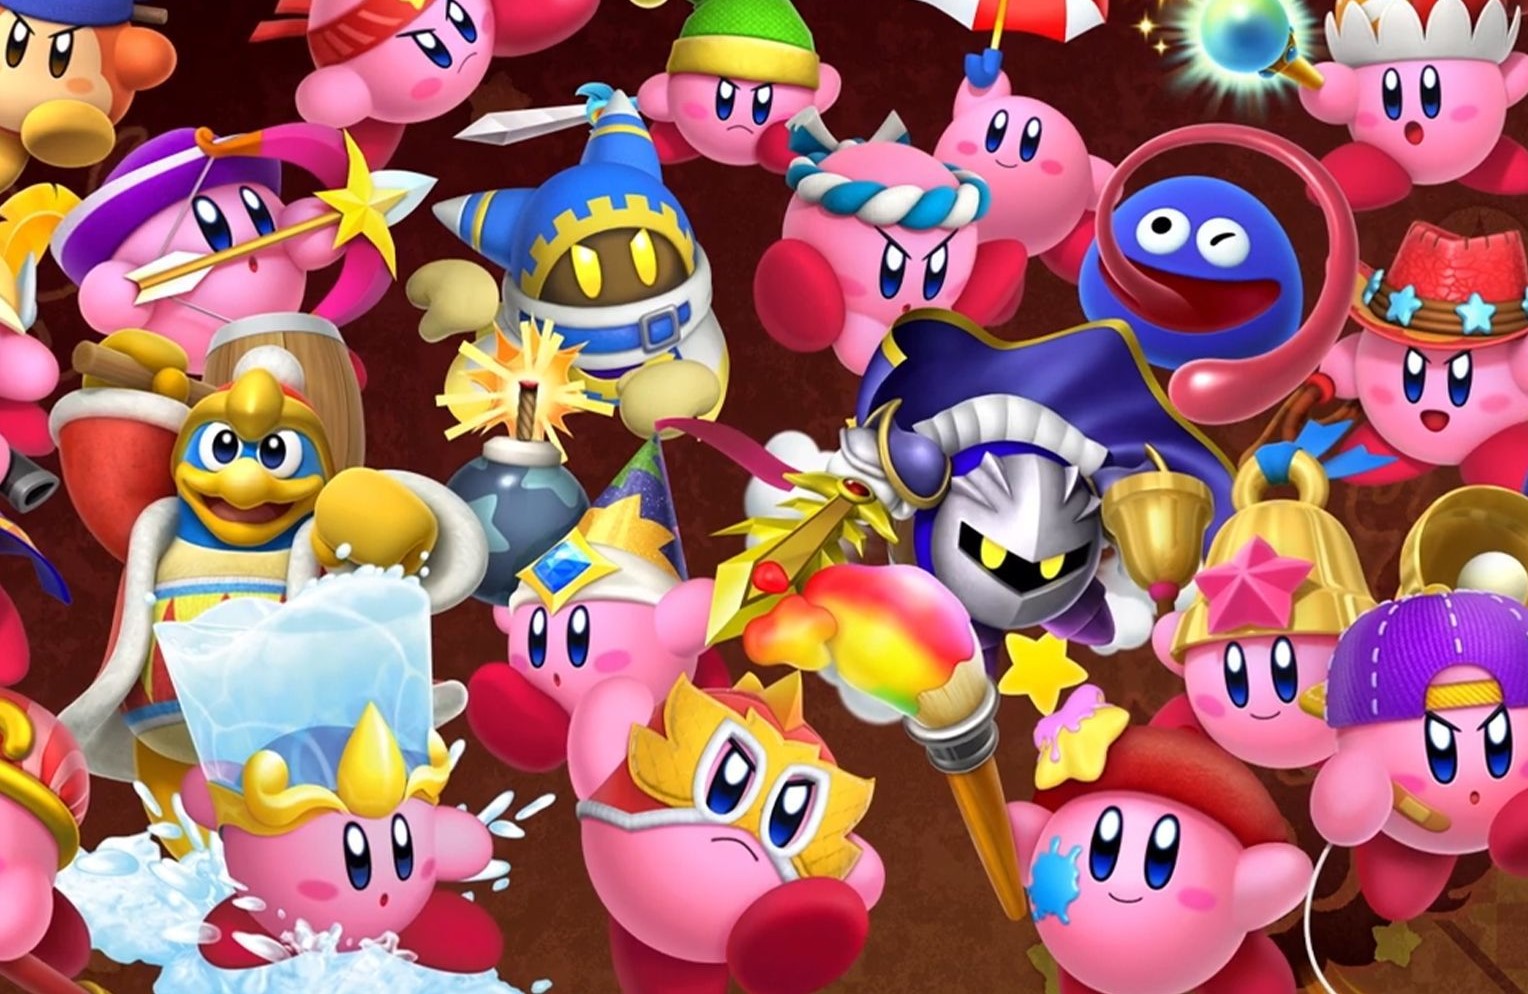 2 Kirby Downloaded – Fighters Digitally (Nintendo Switch) Review: